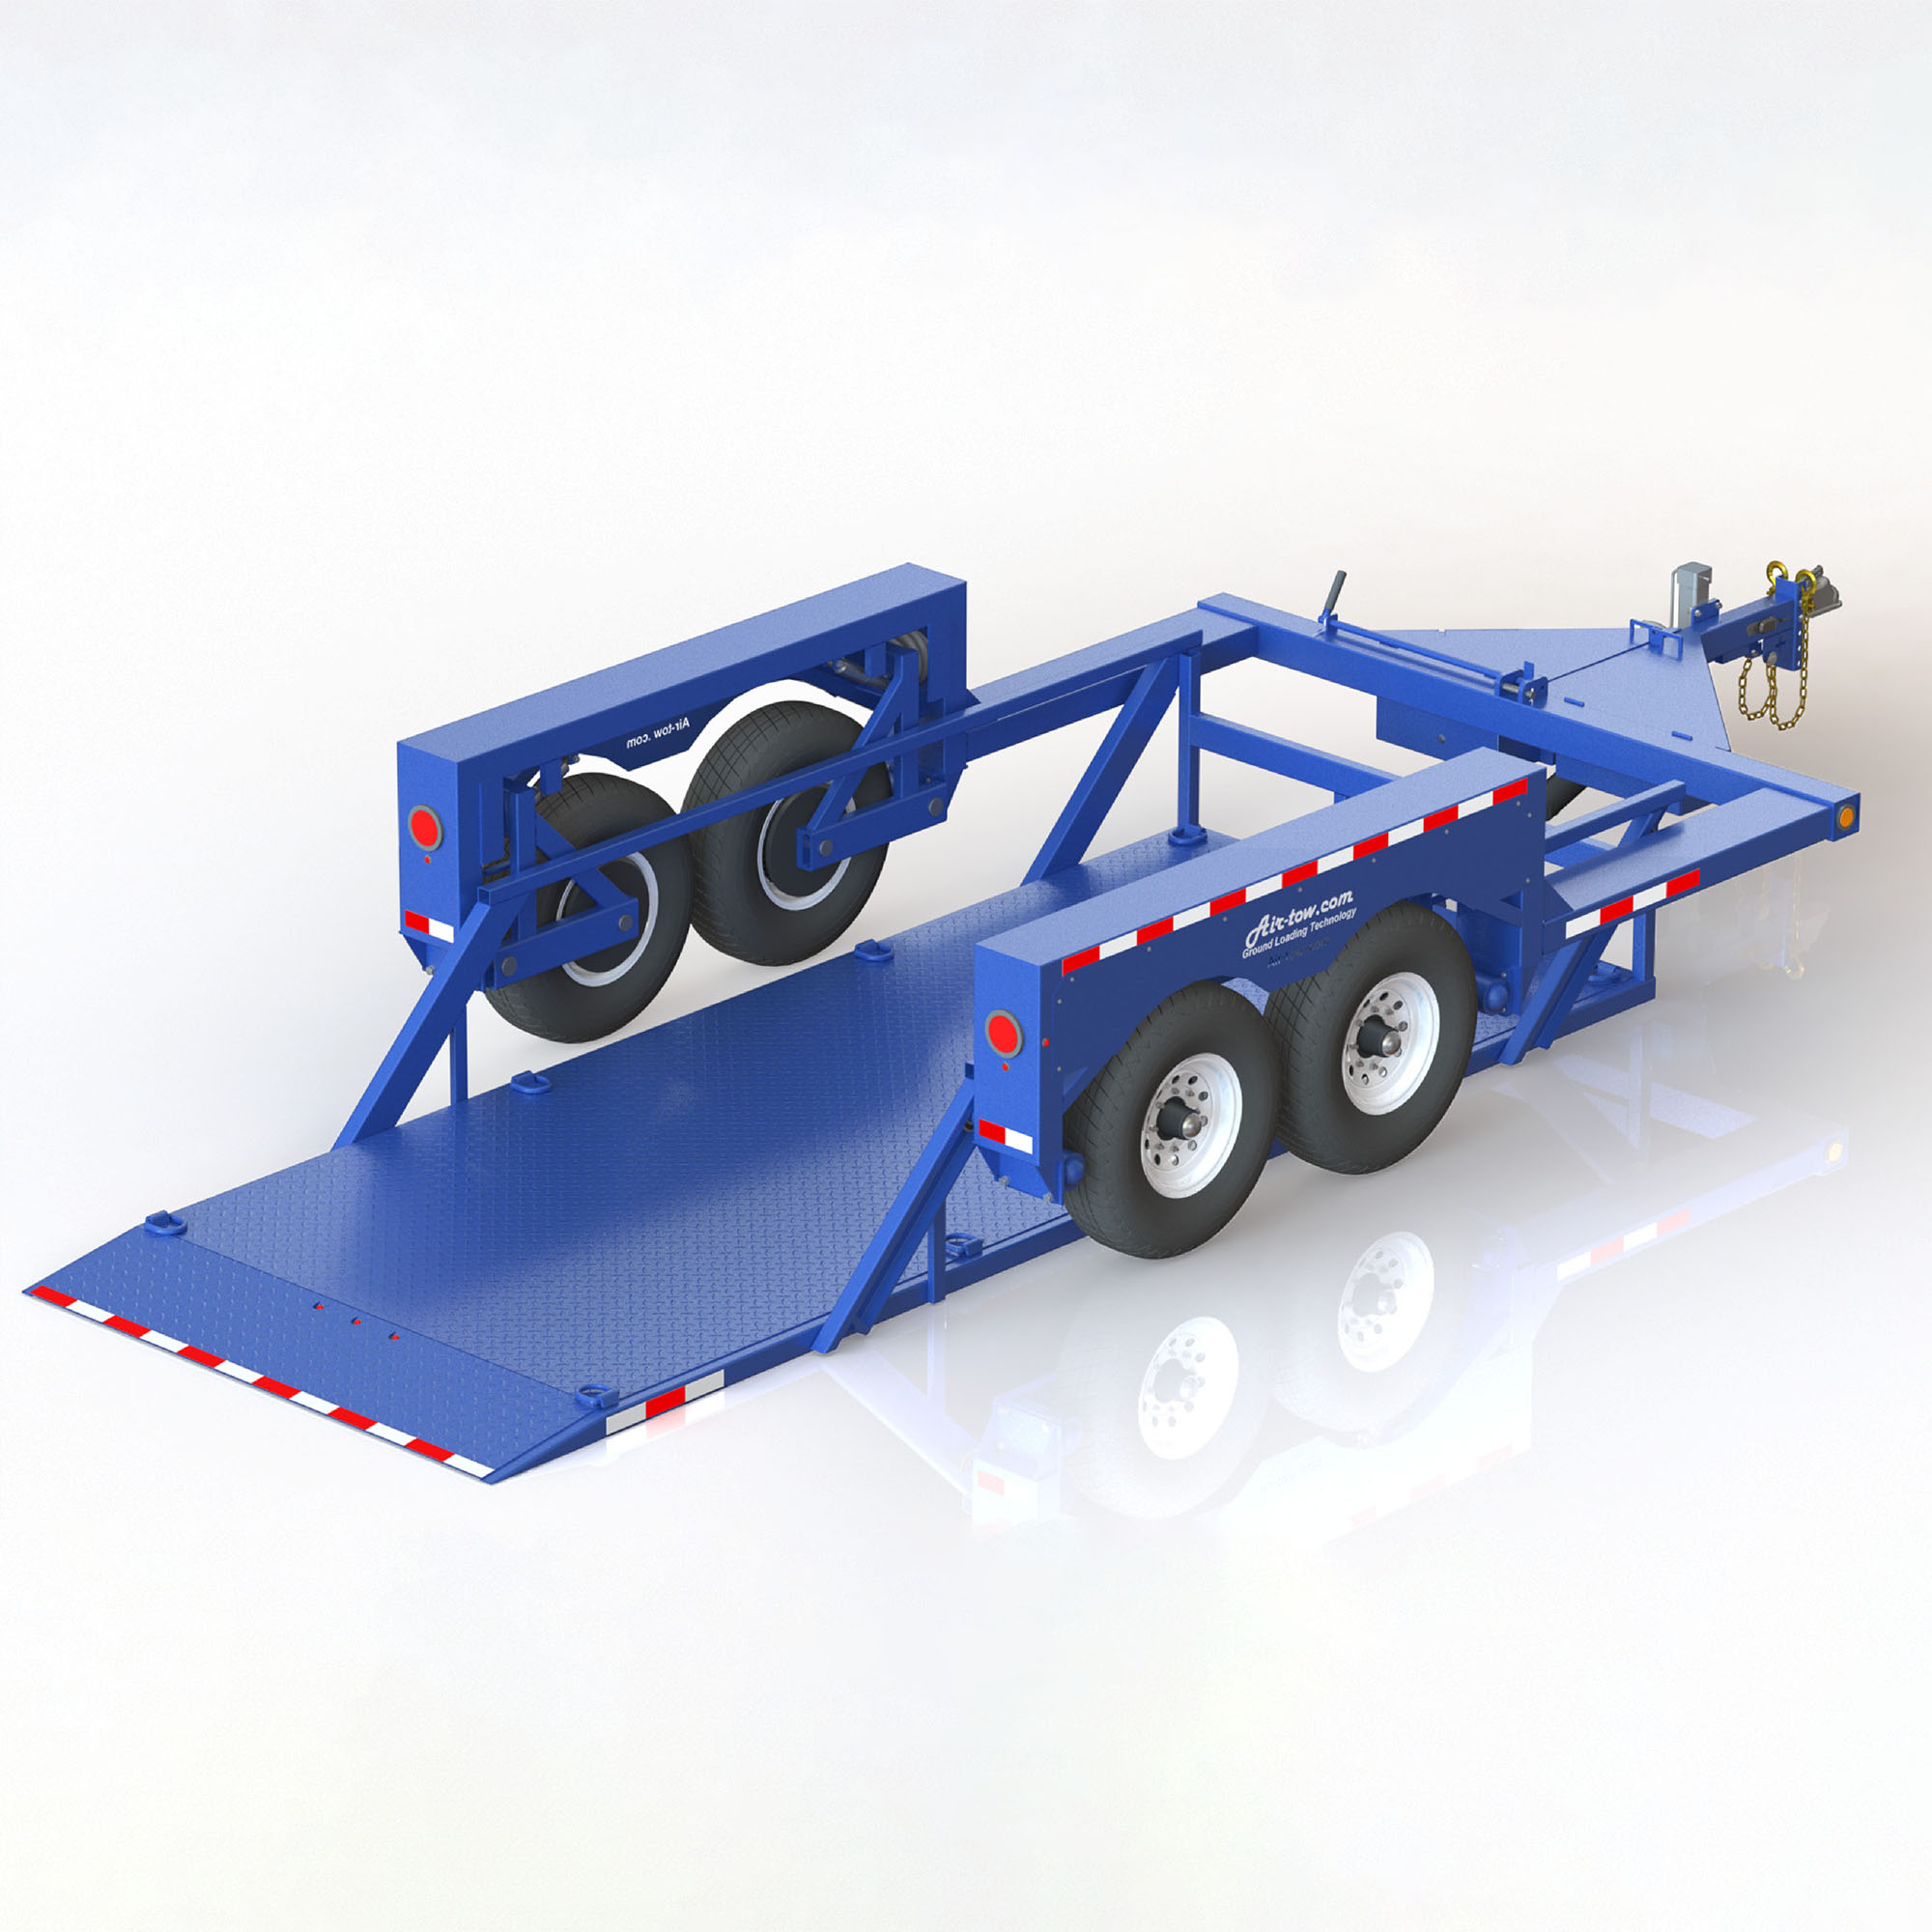 Air-Tow T16-14 Tandem Axle Flatbed Trailer